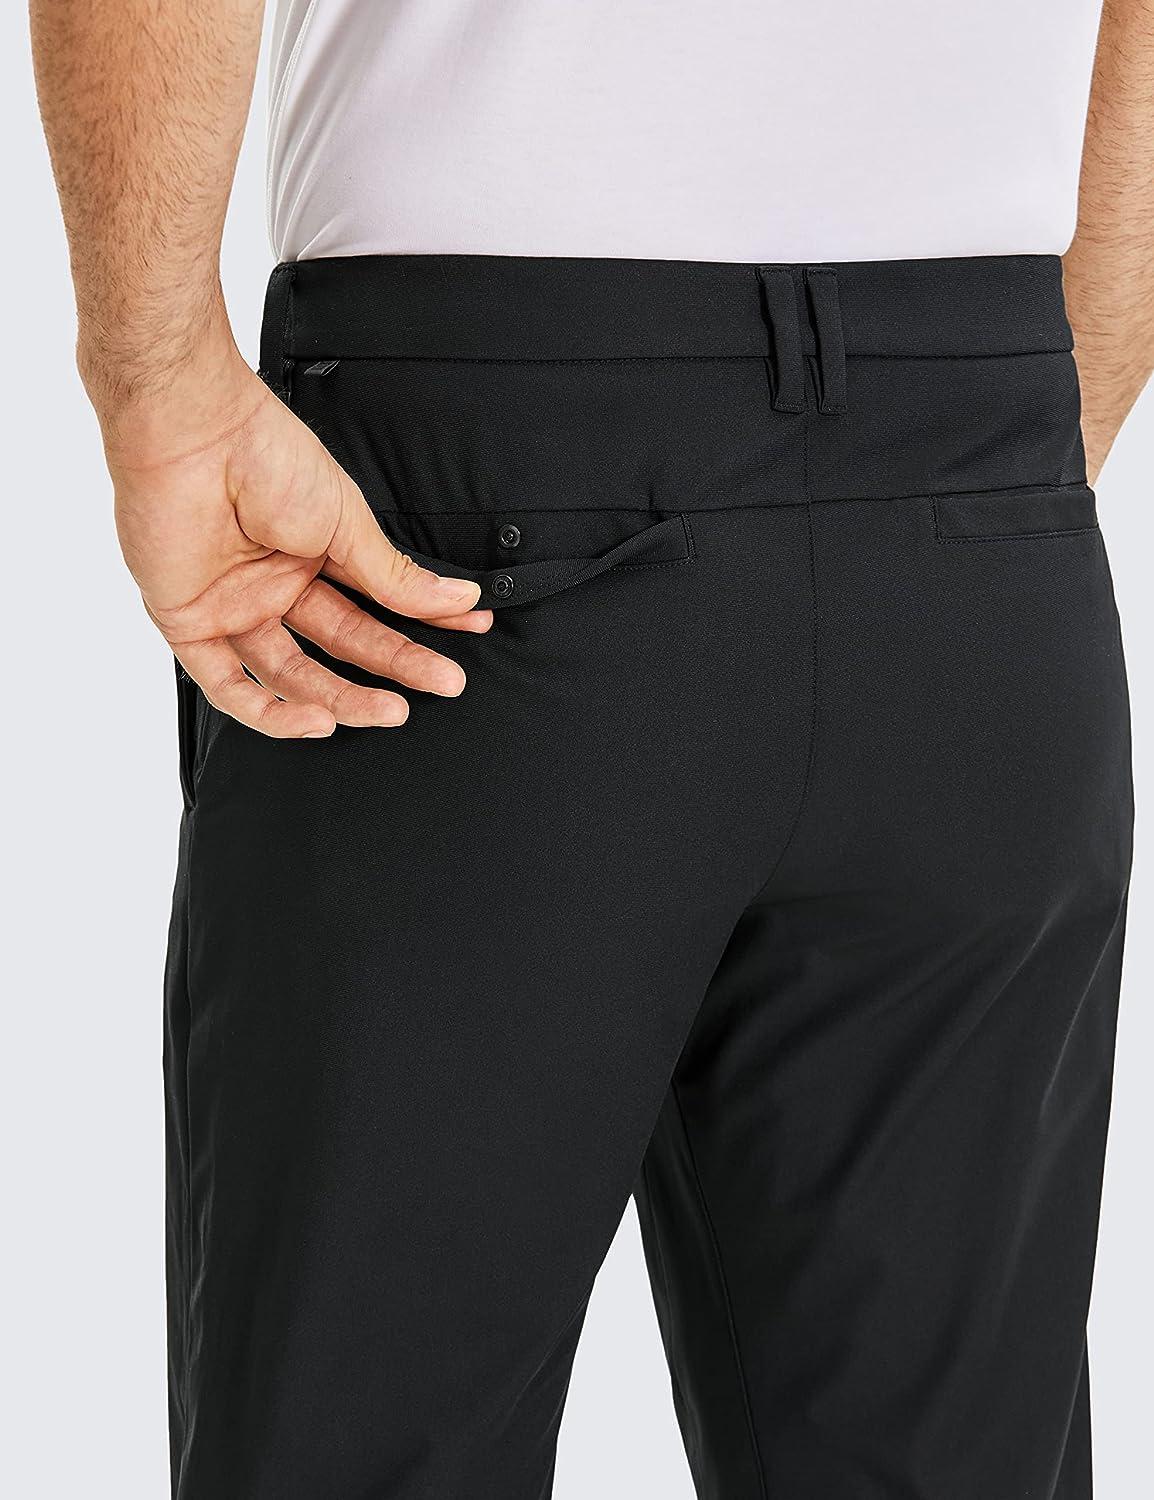 CRZ YOGA Men's All-Day Comfort Golf Pants - 30/32/34 Quick Dry  Lightweight Work Casual Trousers with Pockets 36W x 32L Black